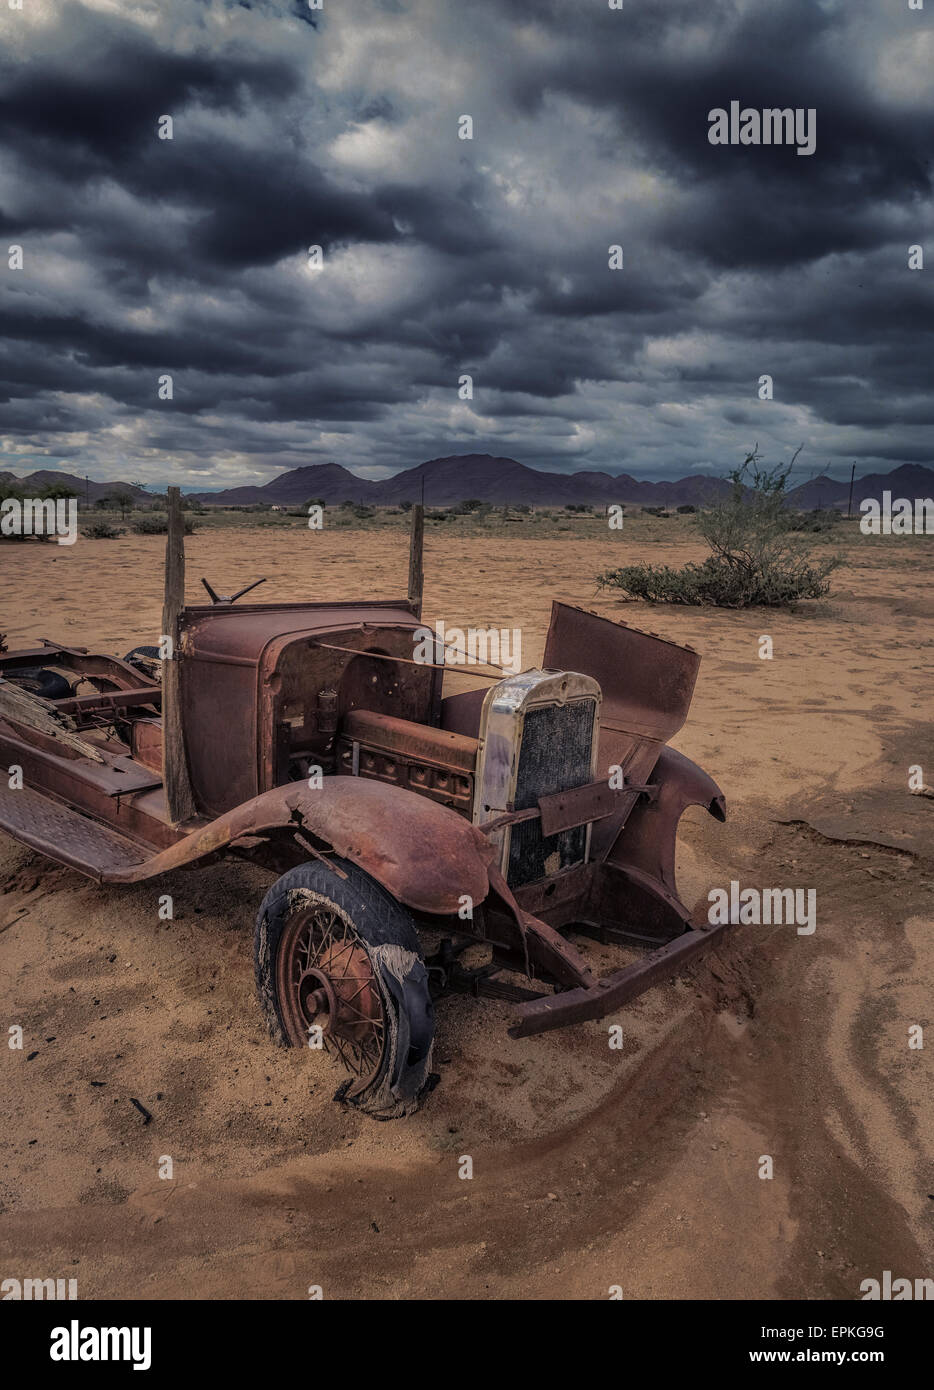 Rusty old vehicle in Solitaire. Solitaire is a small settlement in the Khomas Region of Central Namibia, Africa. Stock Photo